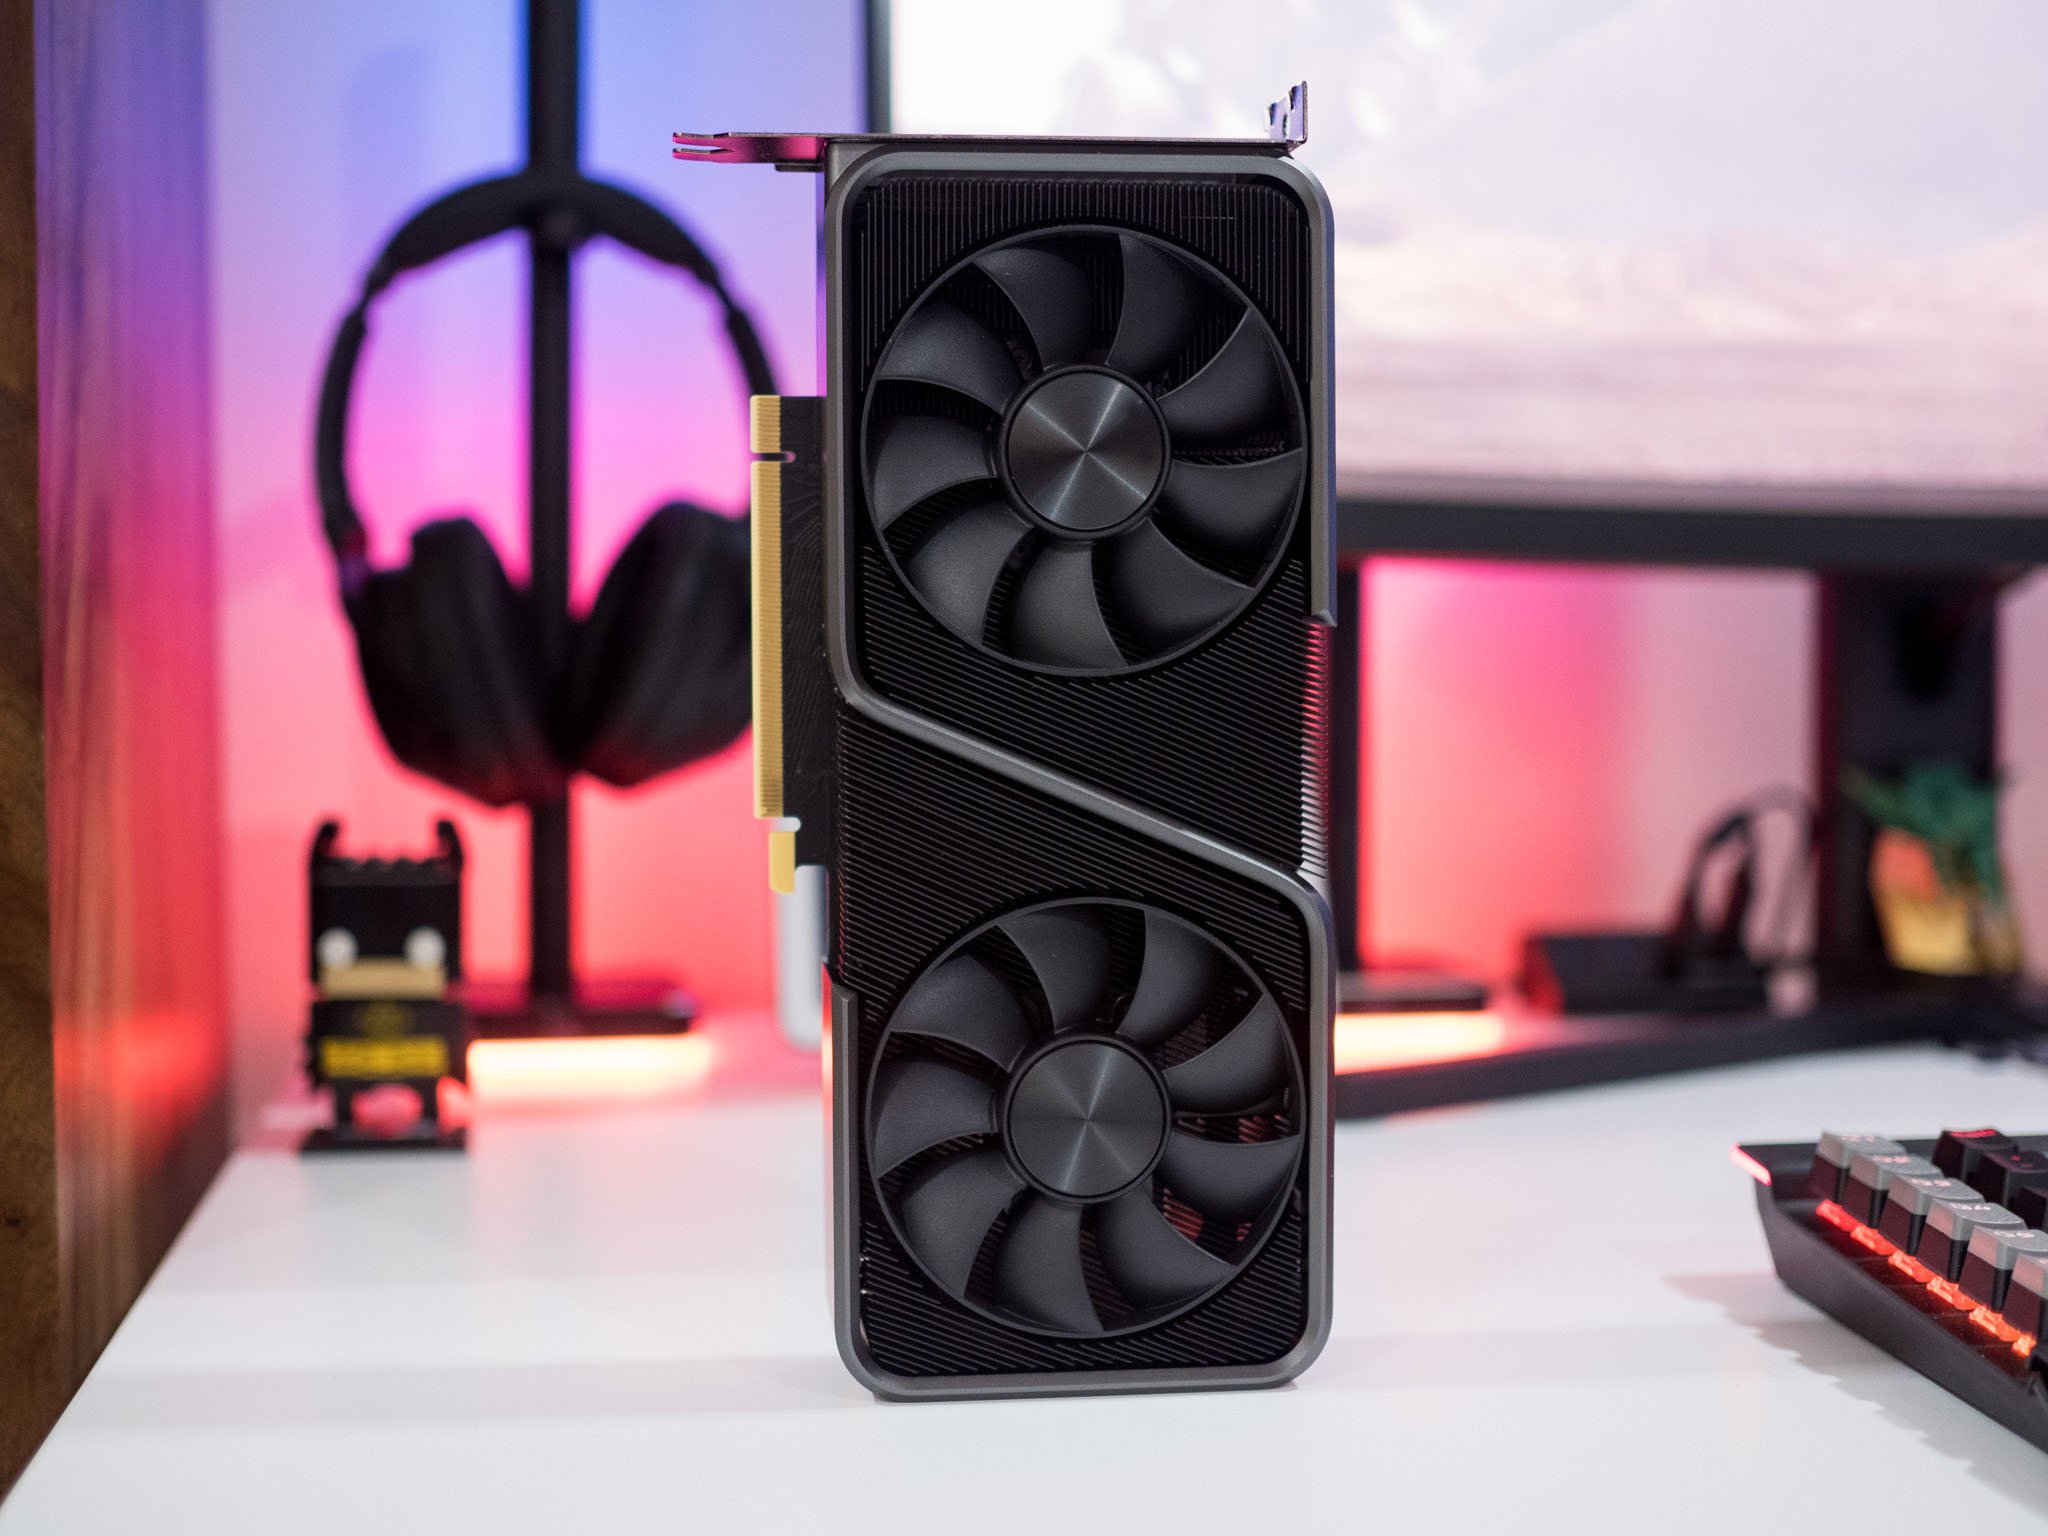 Nvidia GeForce RTX 3070 review: A GPU worth waiting for